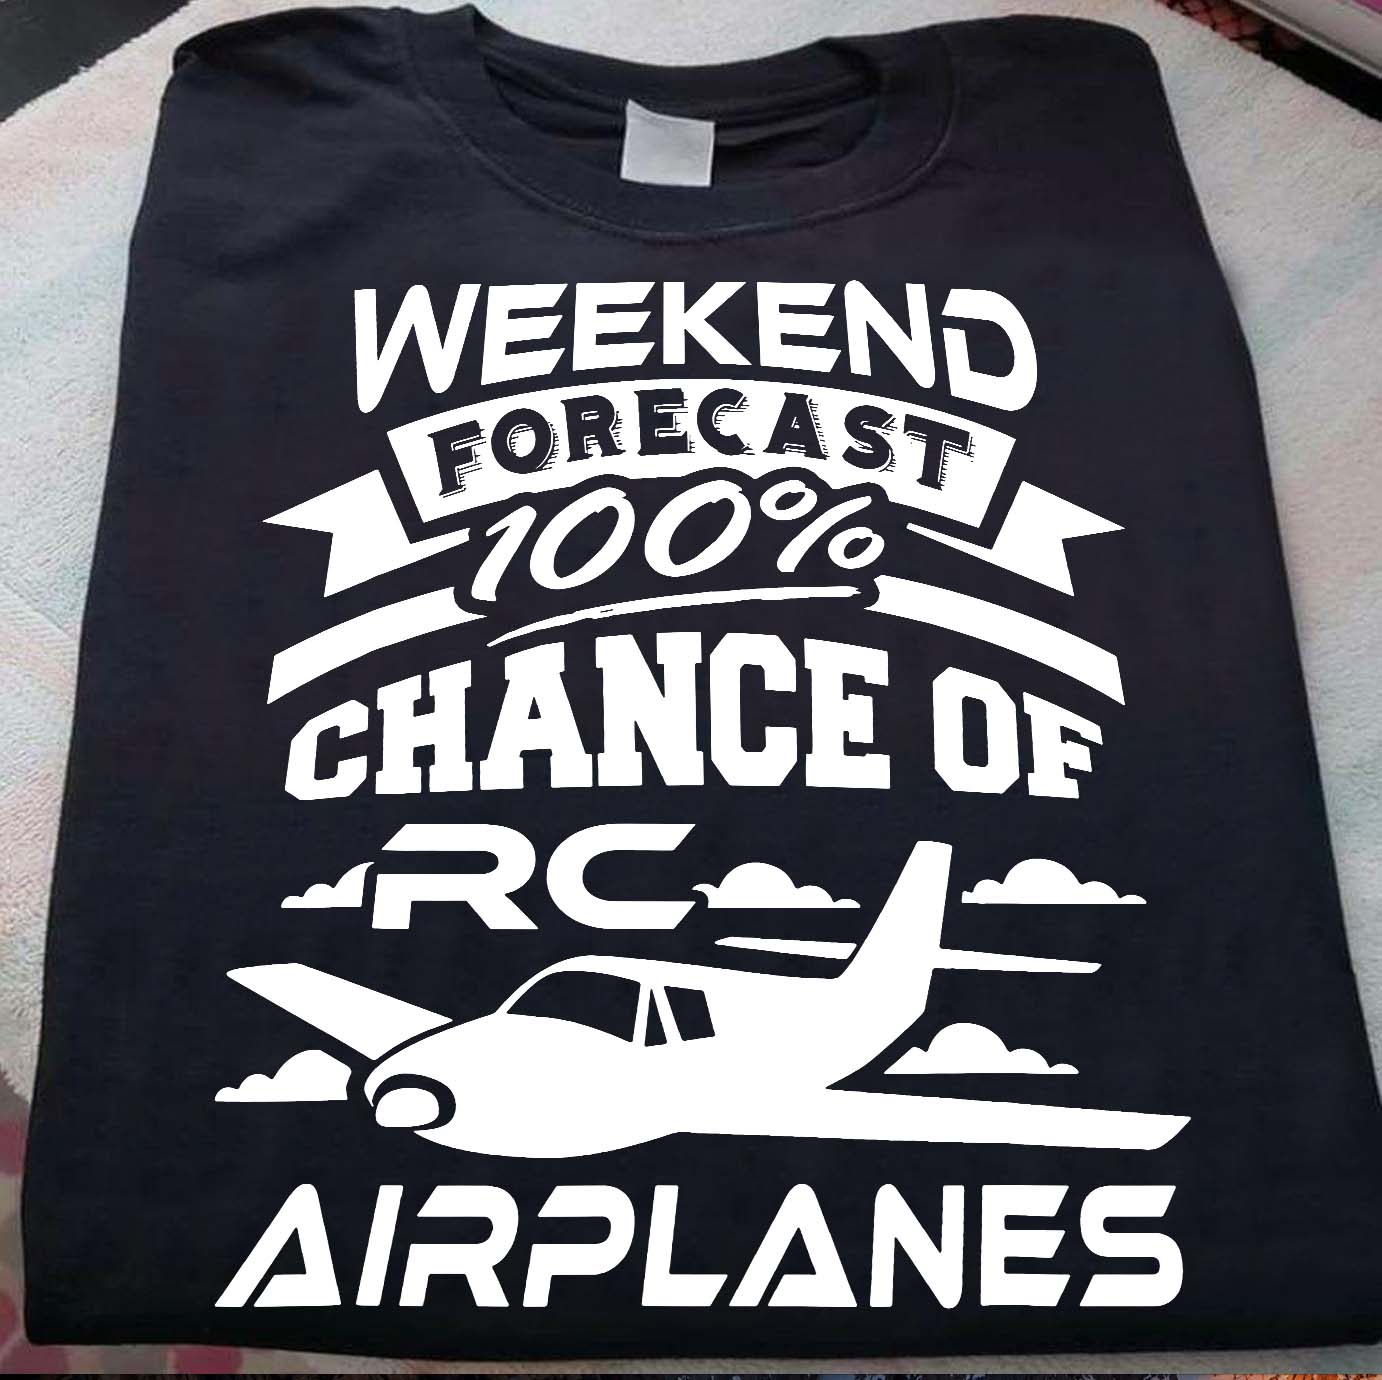 Weekend forecast 100% chance of RC airplanes - RC Aircraft